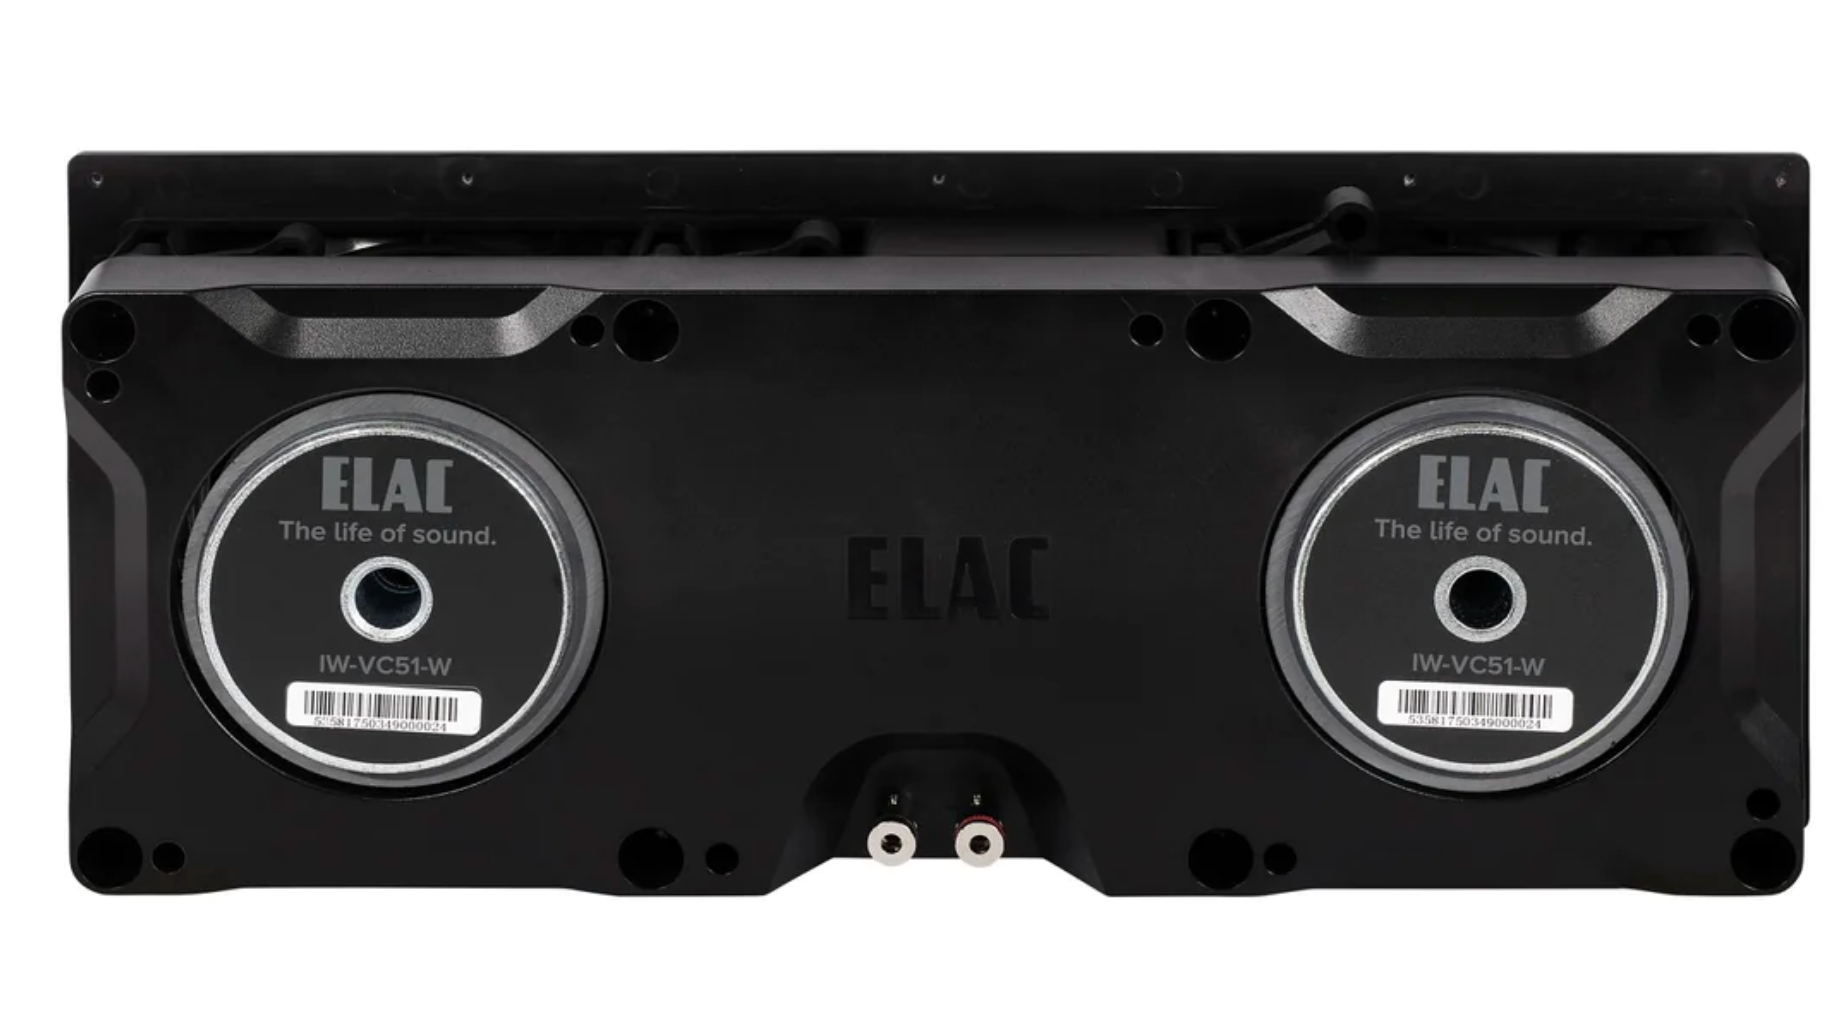 ELAC Vertex IW-VC51-W Dual In-Wall Centre Speaker. Back image